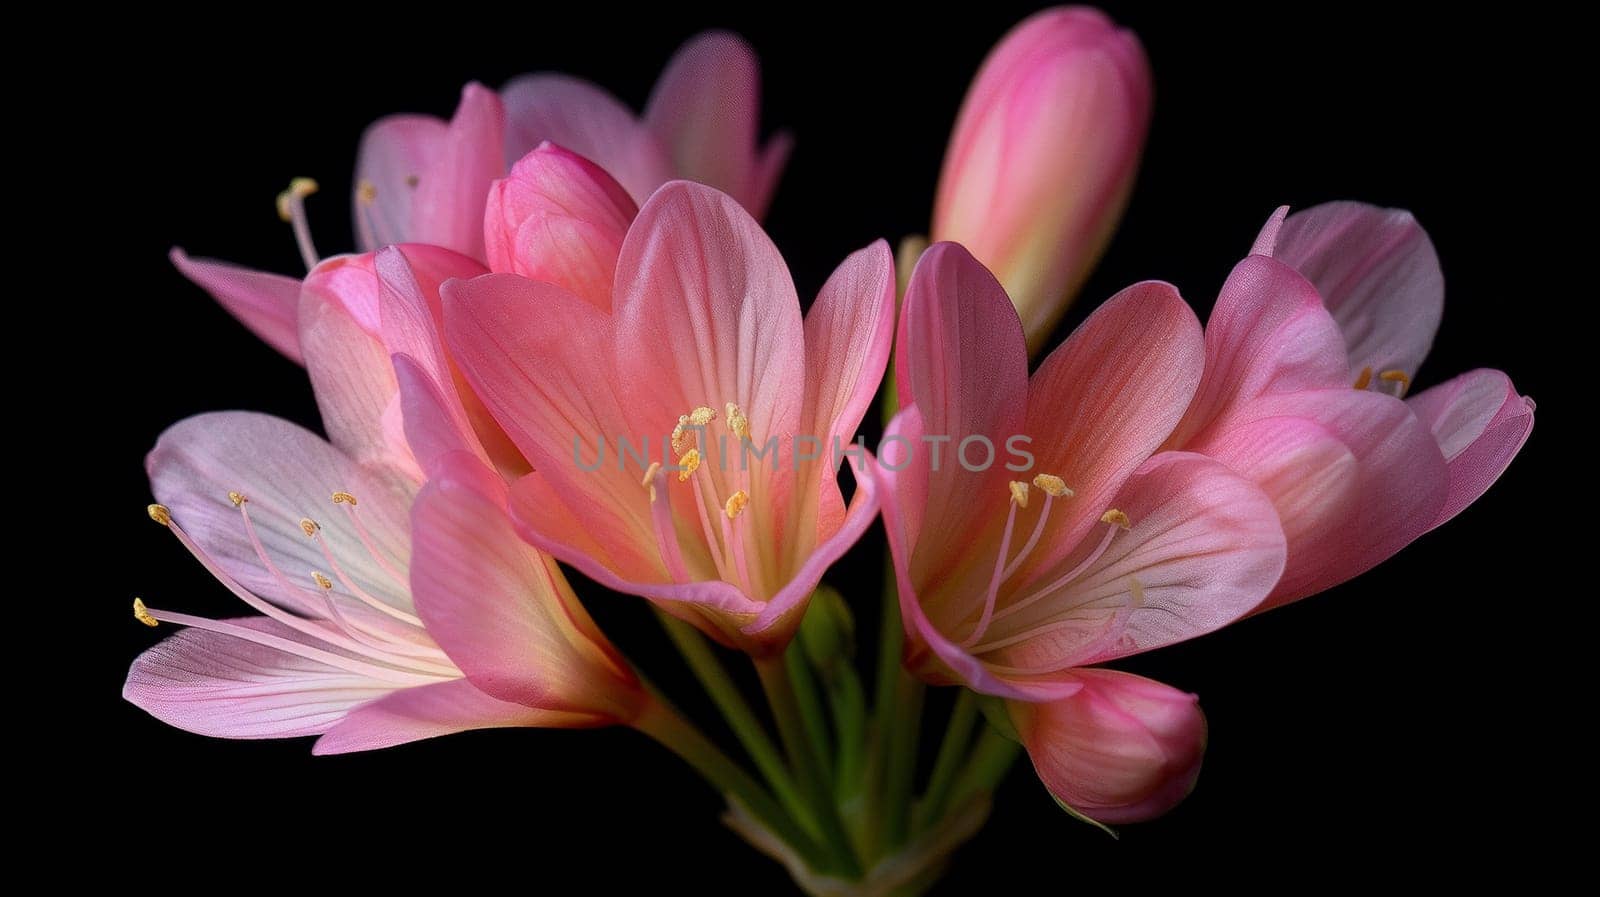 A close up of a bunch of pink flowers on black background